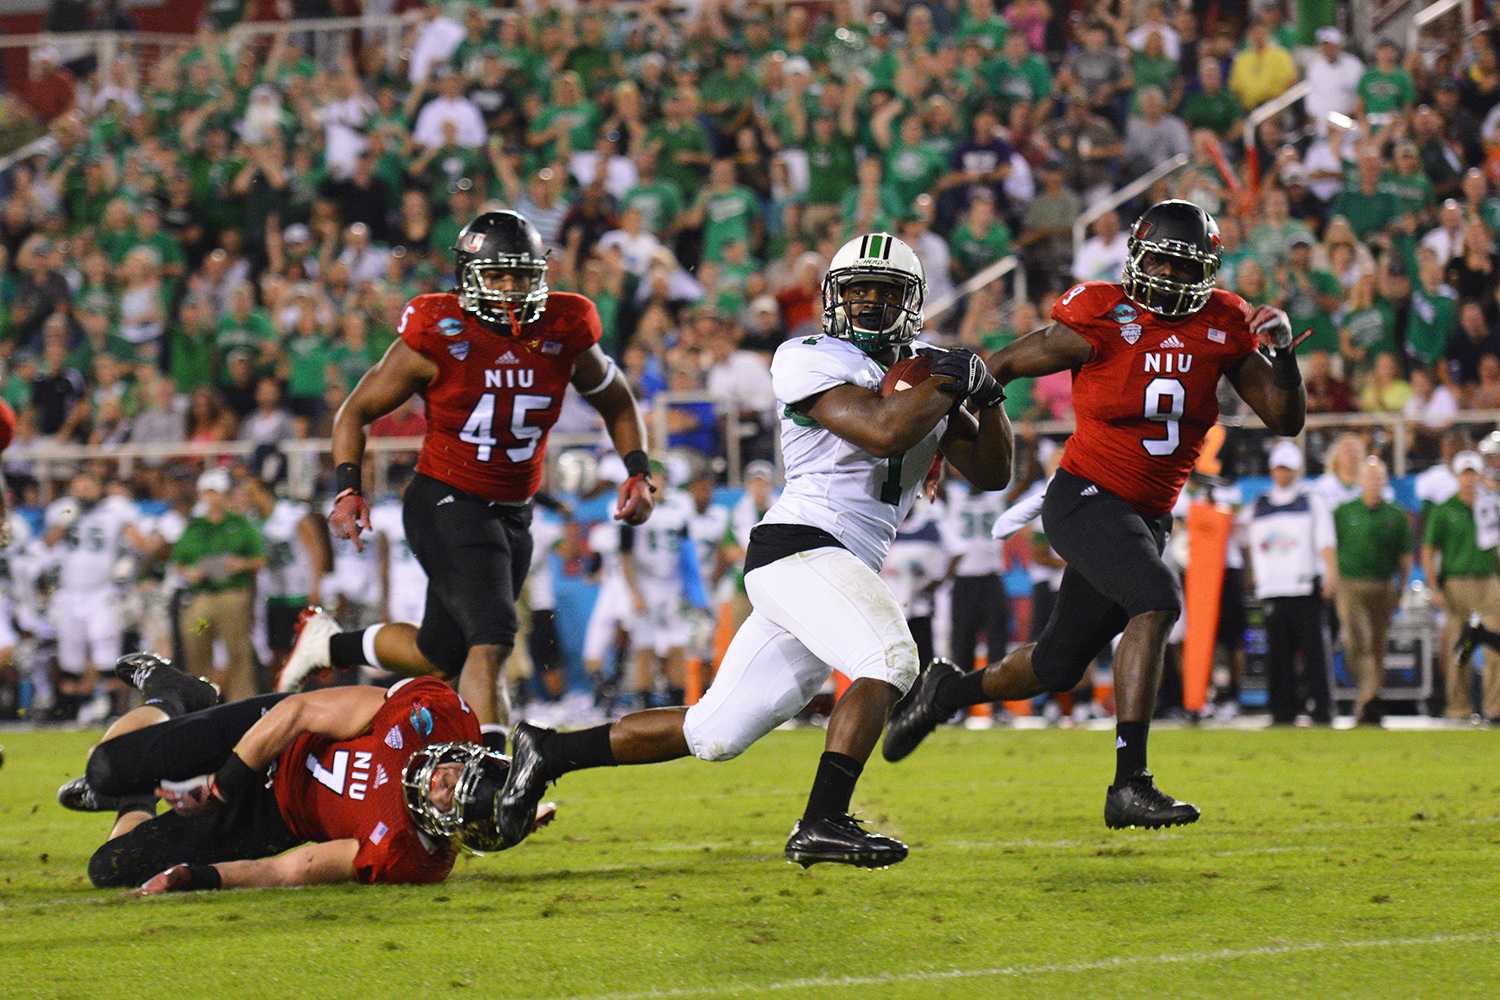 Marshall wide receiver Tommy Shuler led his team in catches (18) and in total receiving yards (189) as the Thundering Herd defeated Northern Illinois 52-23.  